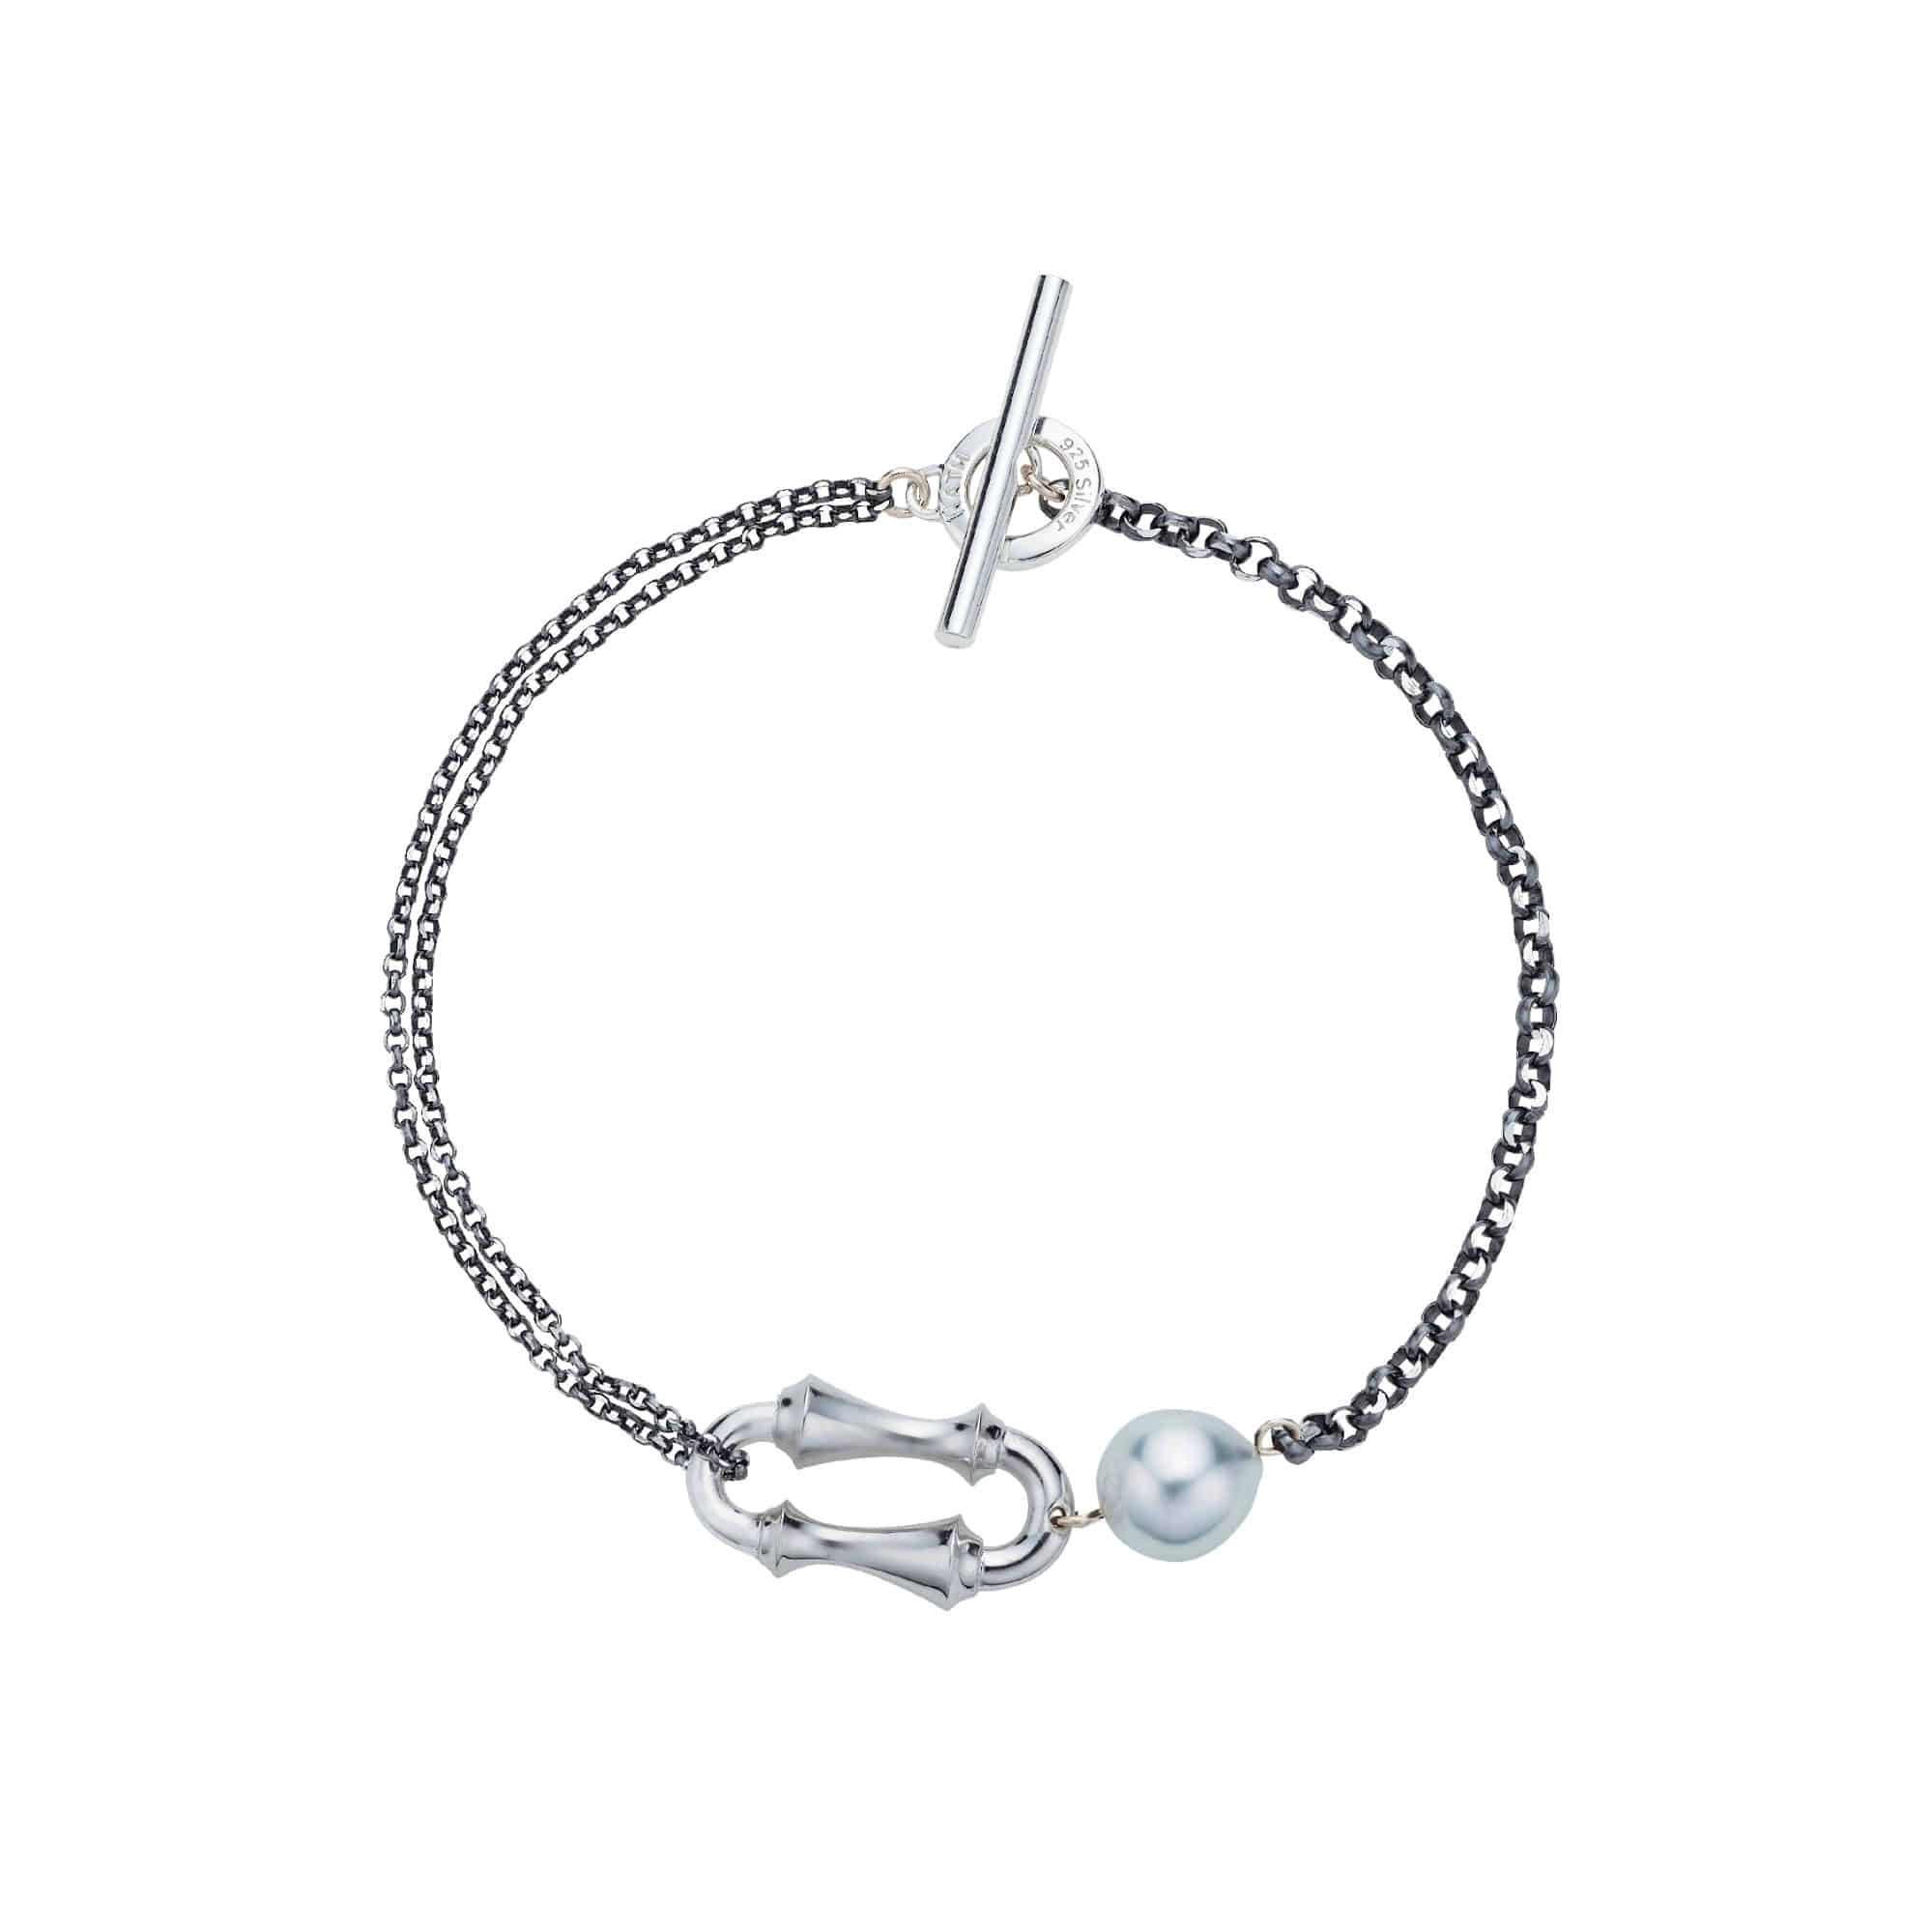 ARC T2 Bracelet in Sterling Silver with an Akoya Pearl (Oxidized Silver Chain)